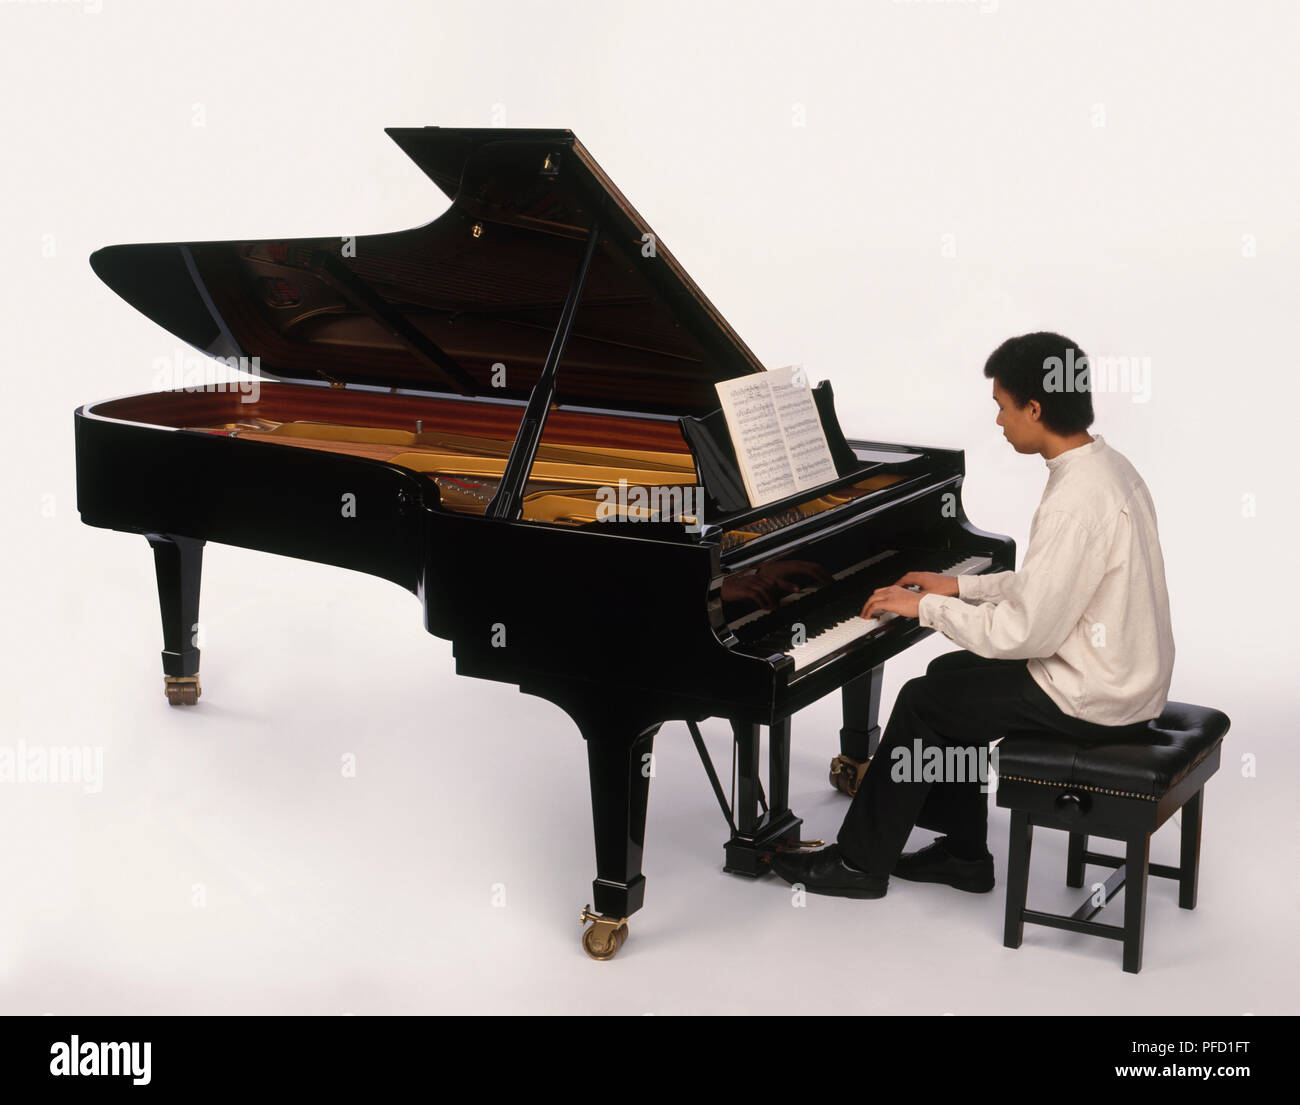 Teenage boy playing grand piano, reading from sheet music, side view Stock Photo